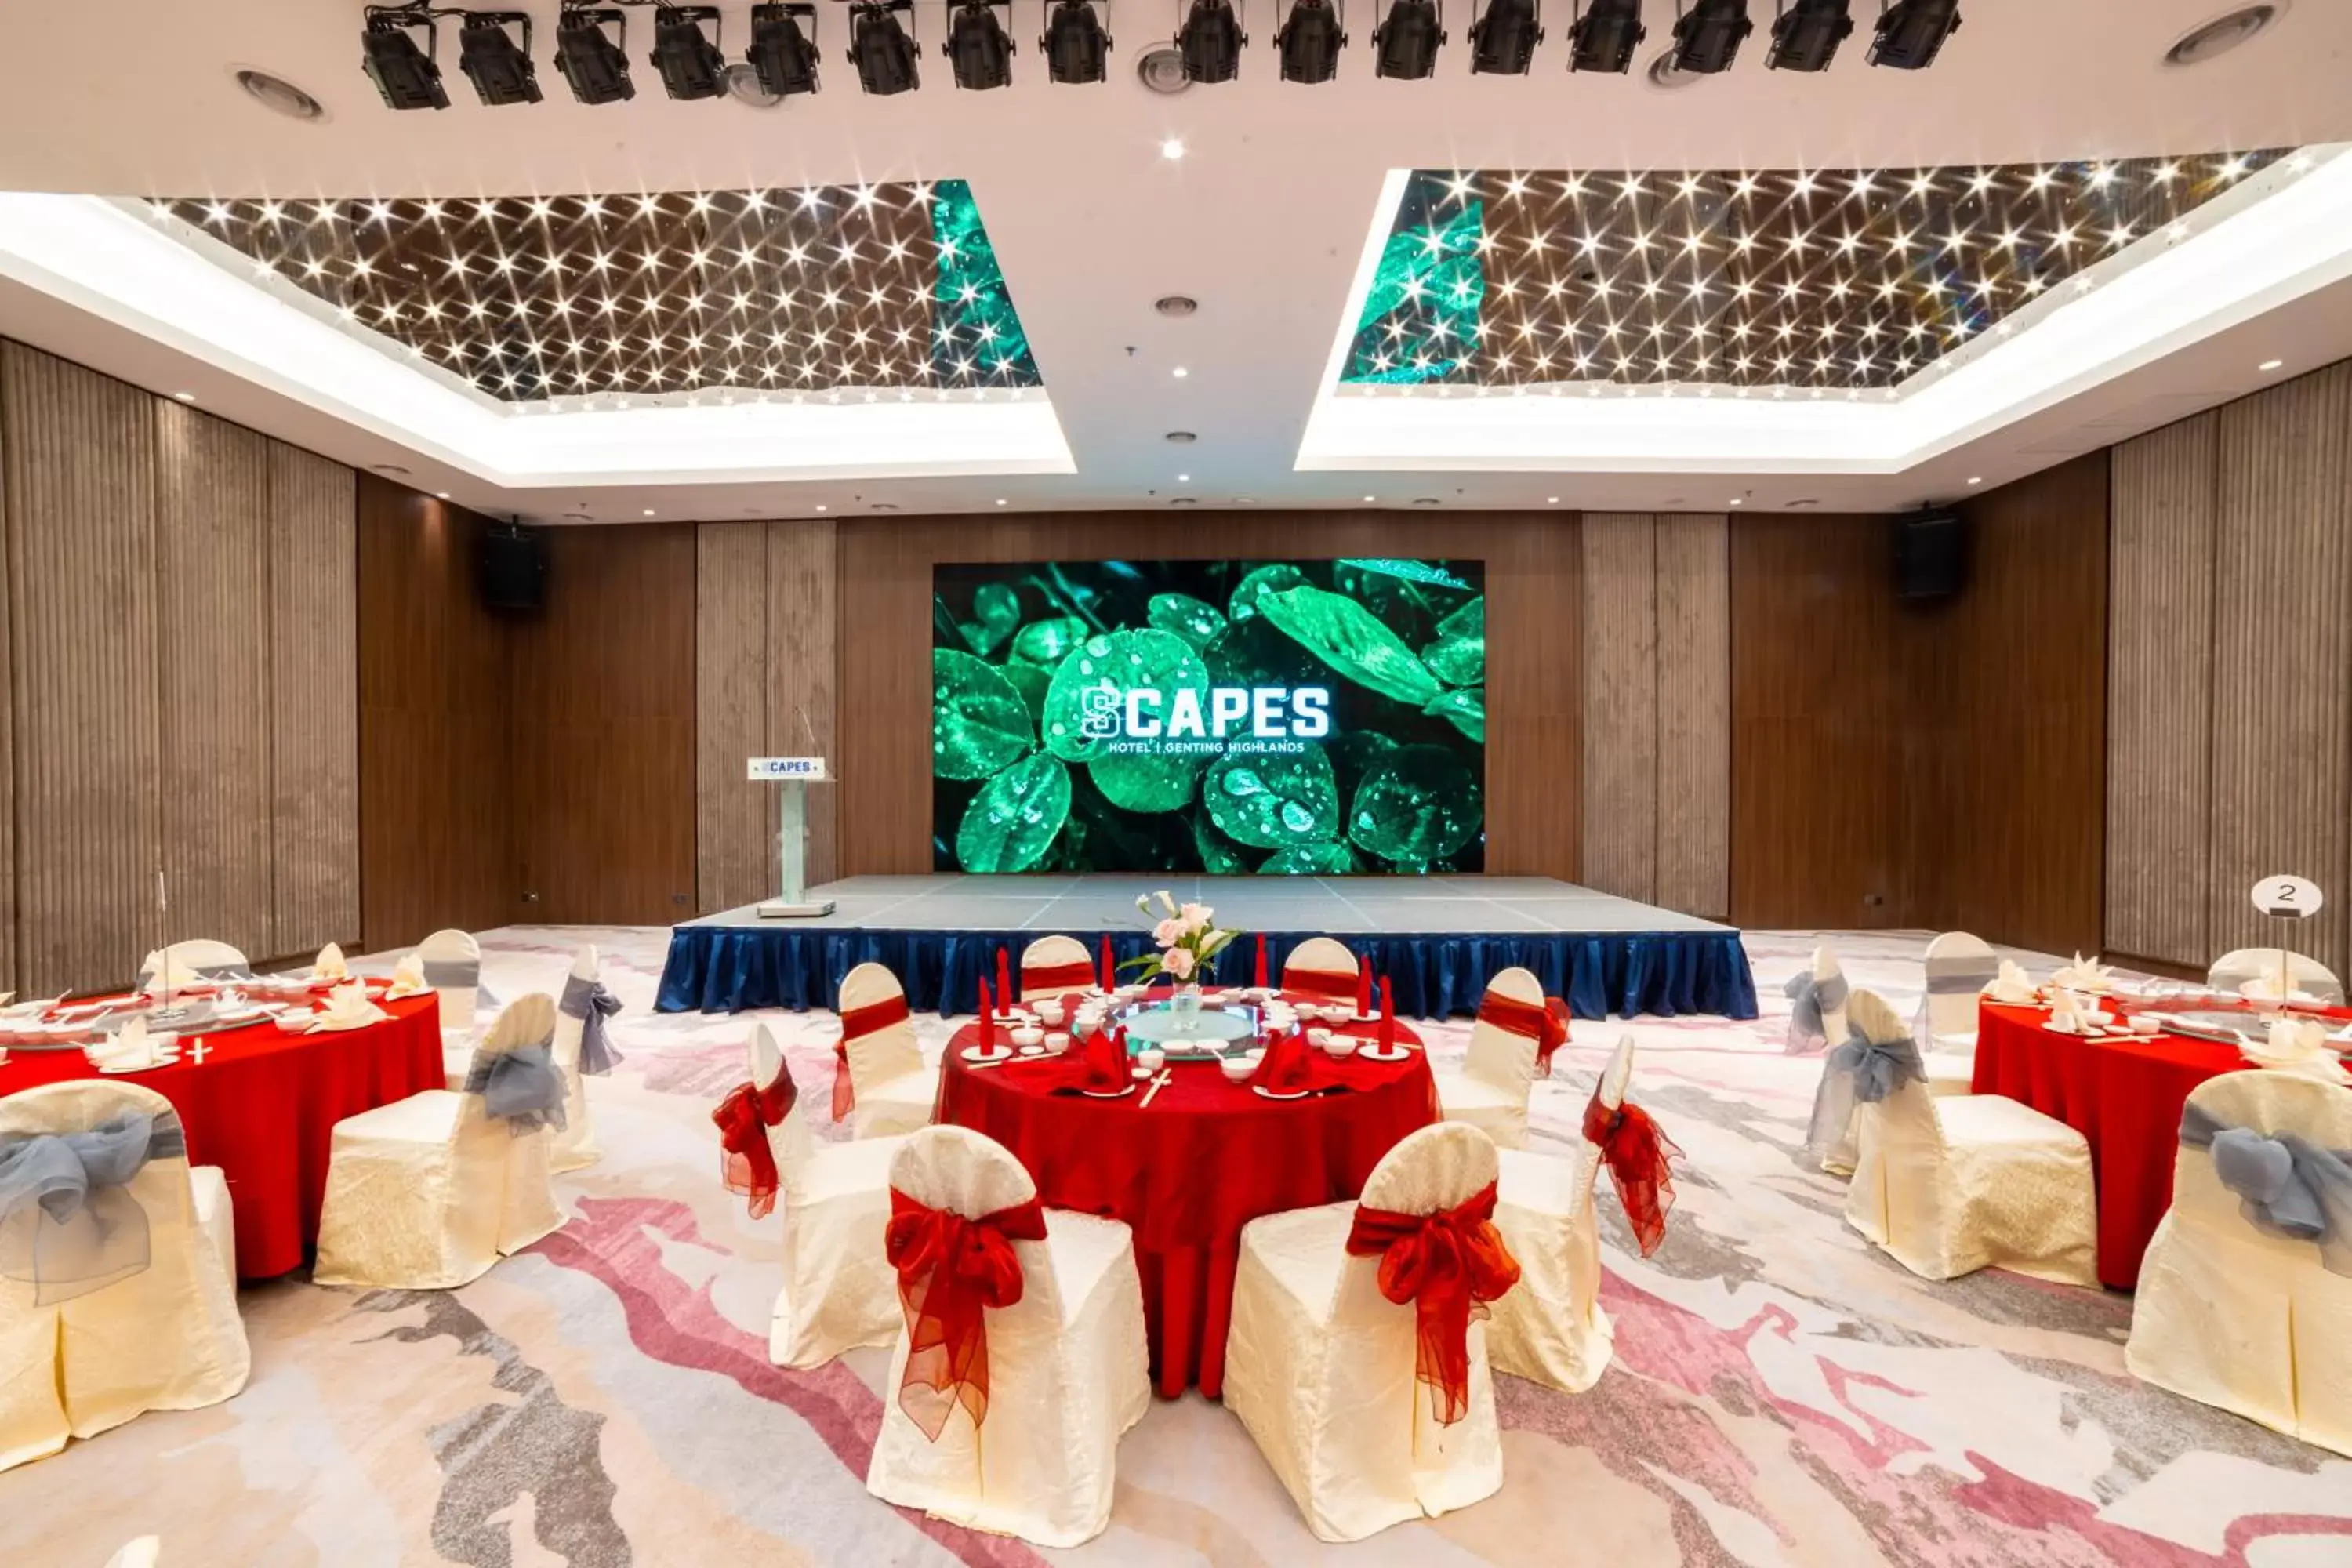 Meeting/conference room, Banquet Facilities in SCAPES Hotel